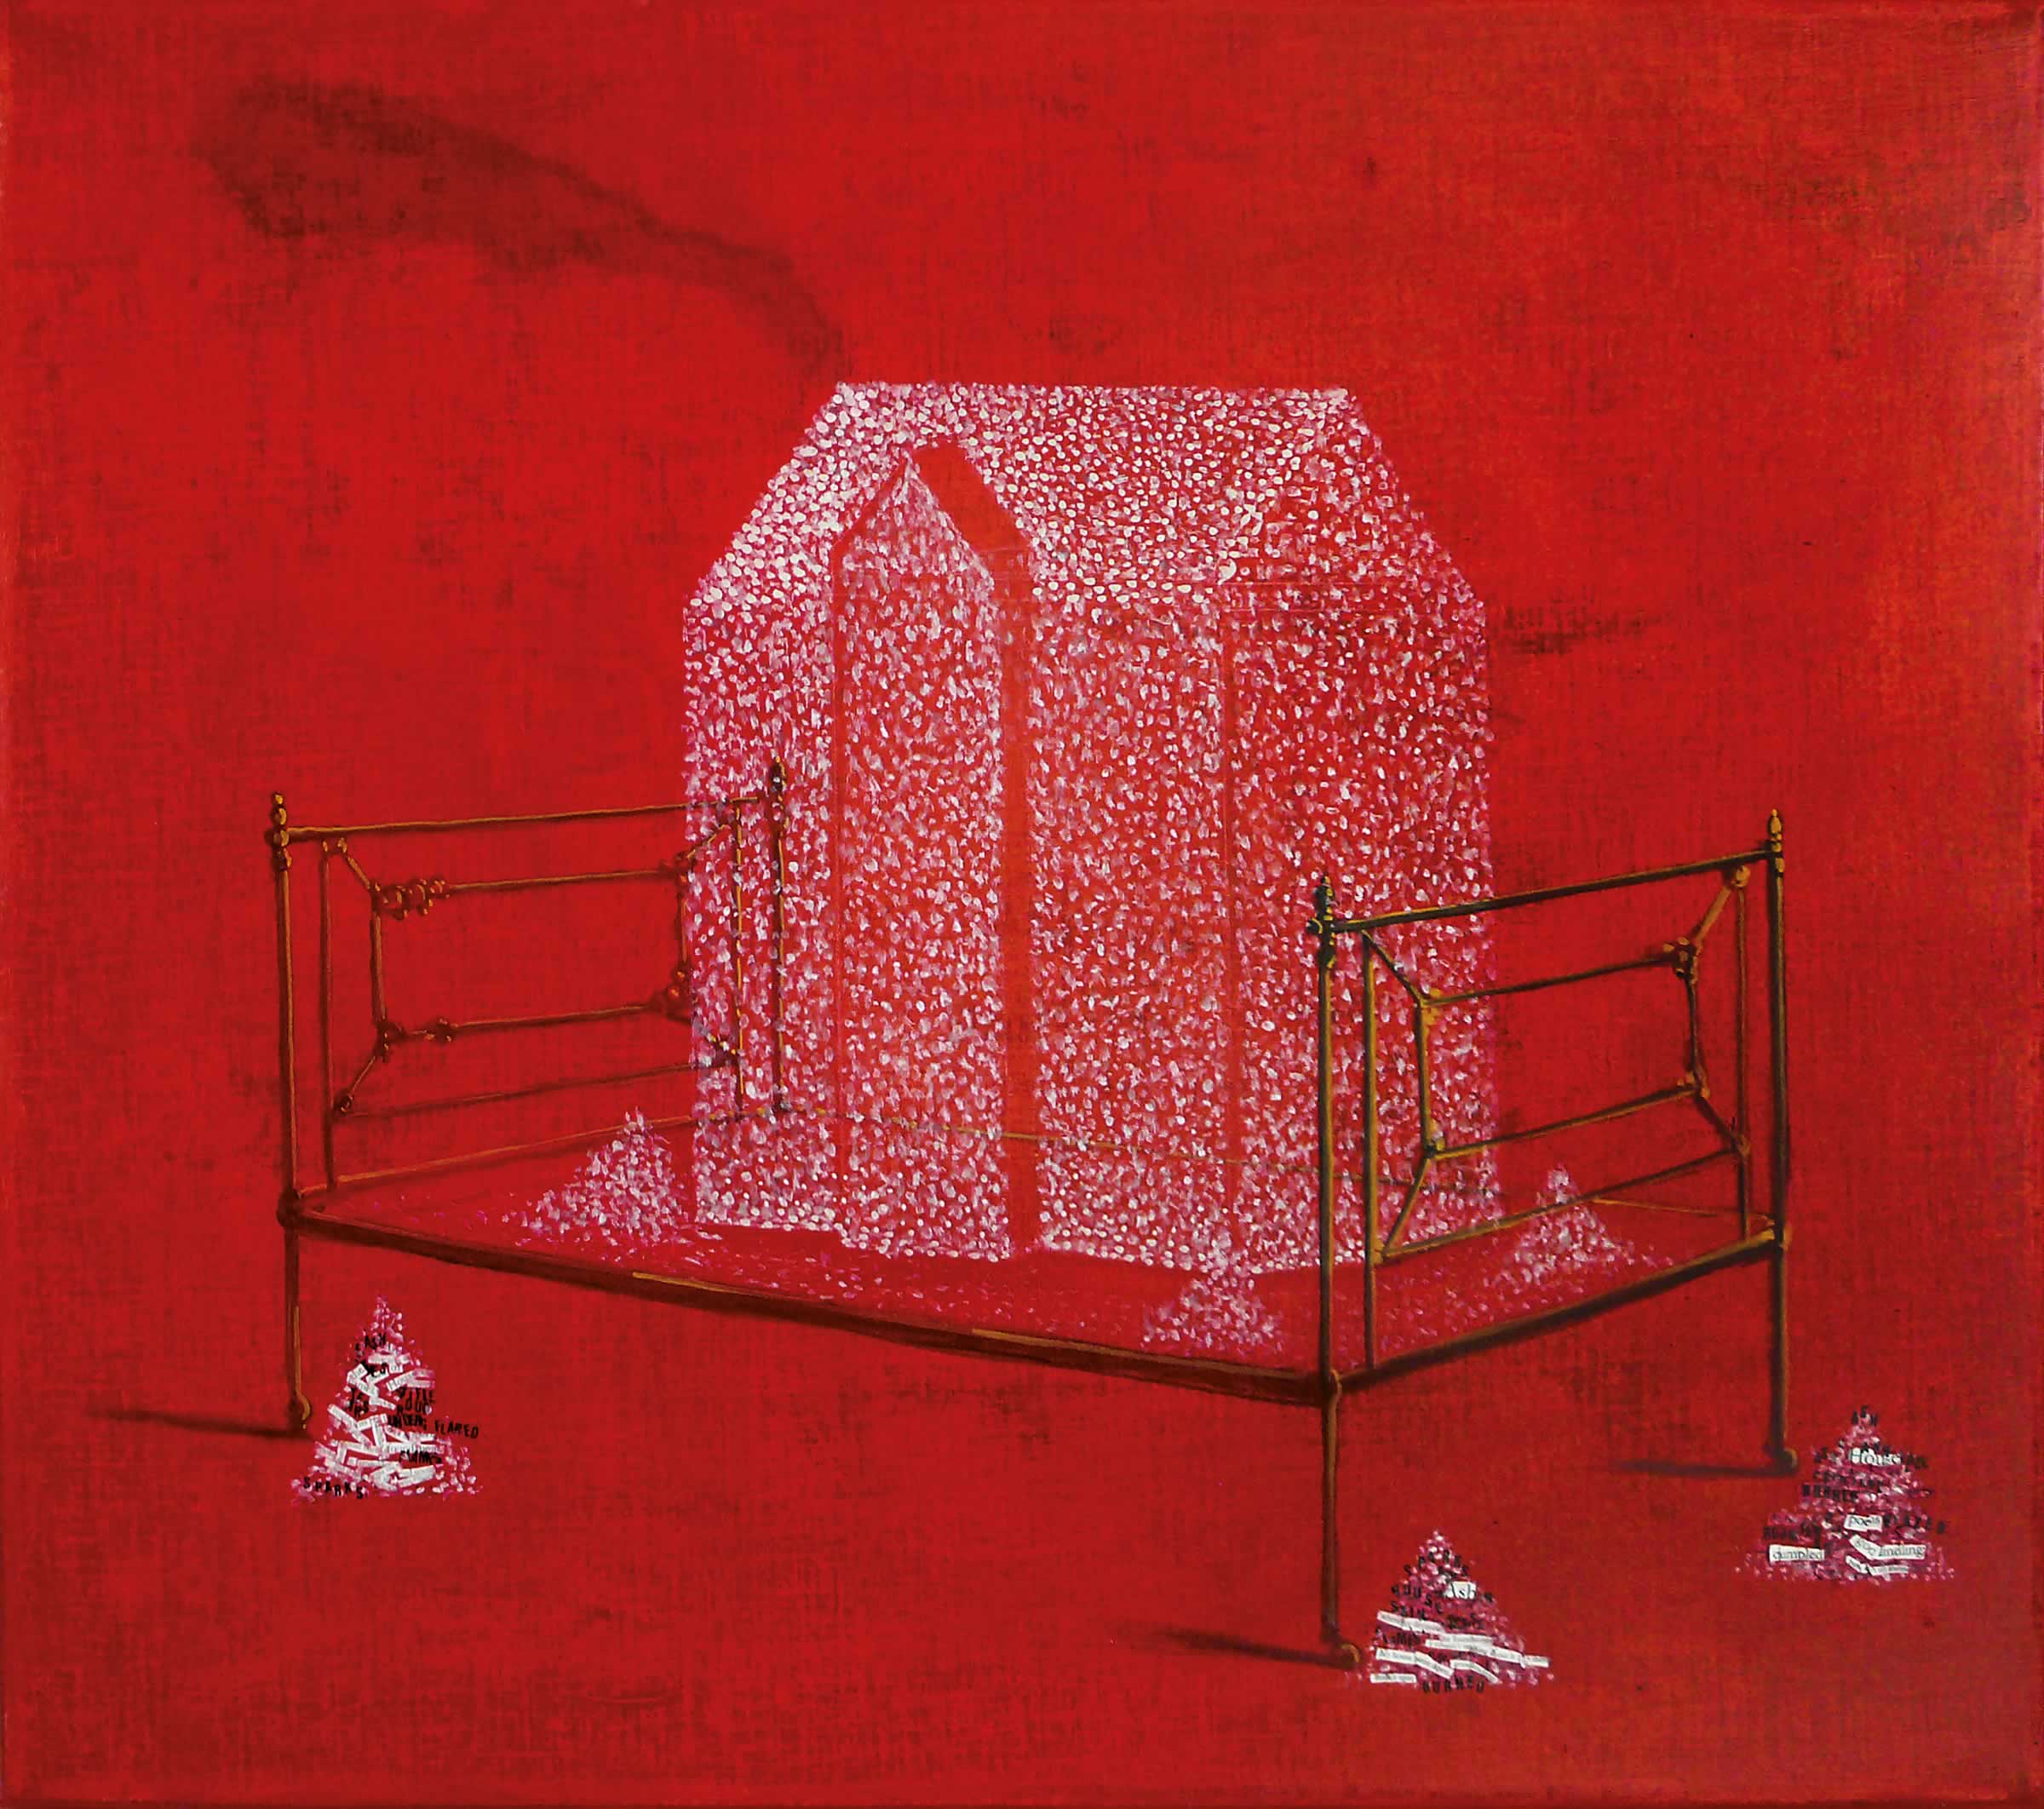 Painting by artist Helen Wright, titled House of Ash (2013) showing a striking red background with a house constructed of small white ash particles sitting on a wrought iron bed stand.